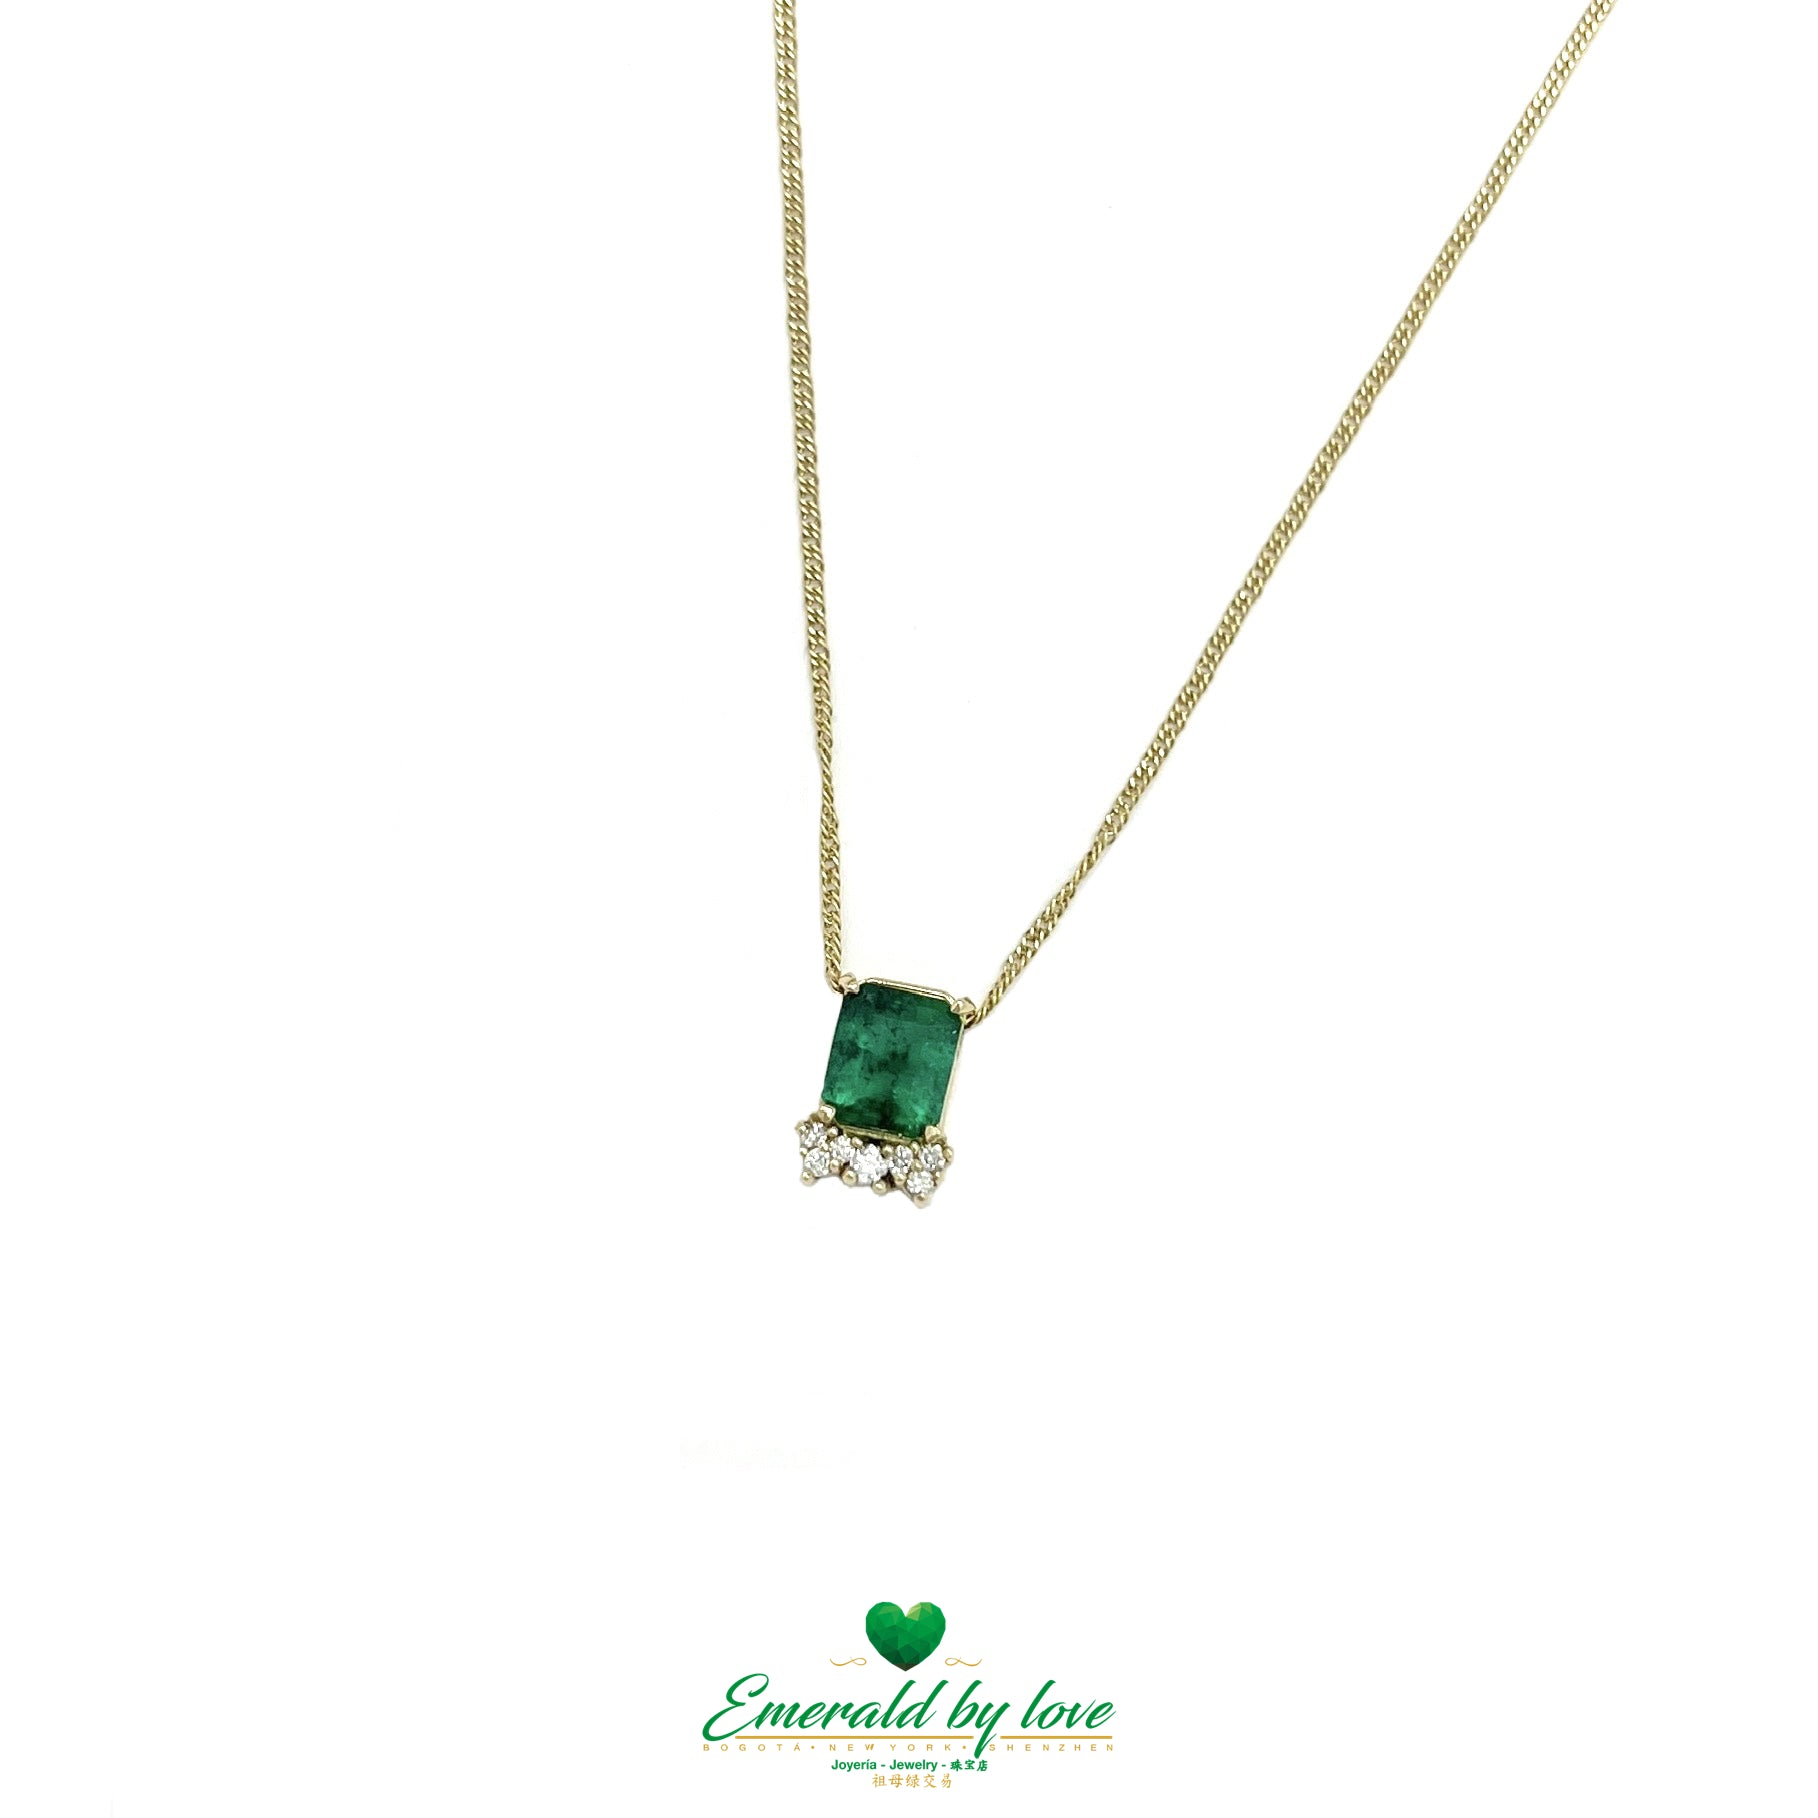 Radiant crown pendant with emeralds and diamonds